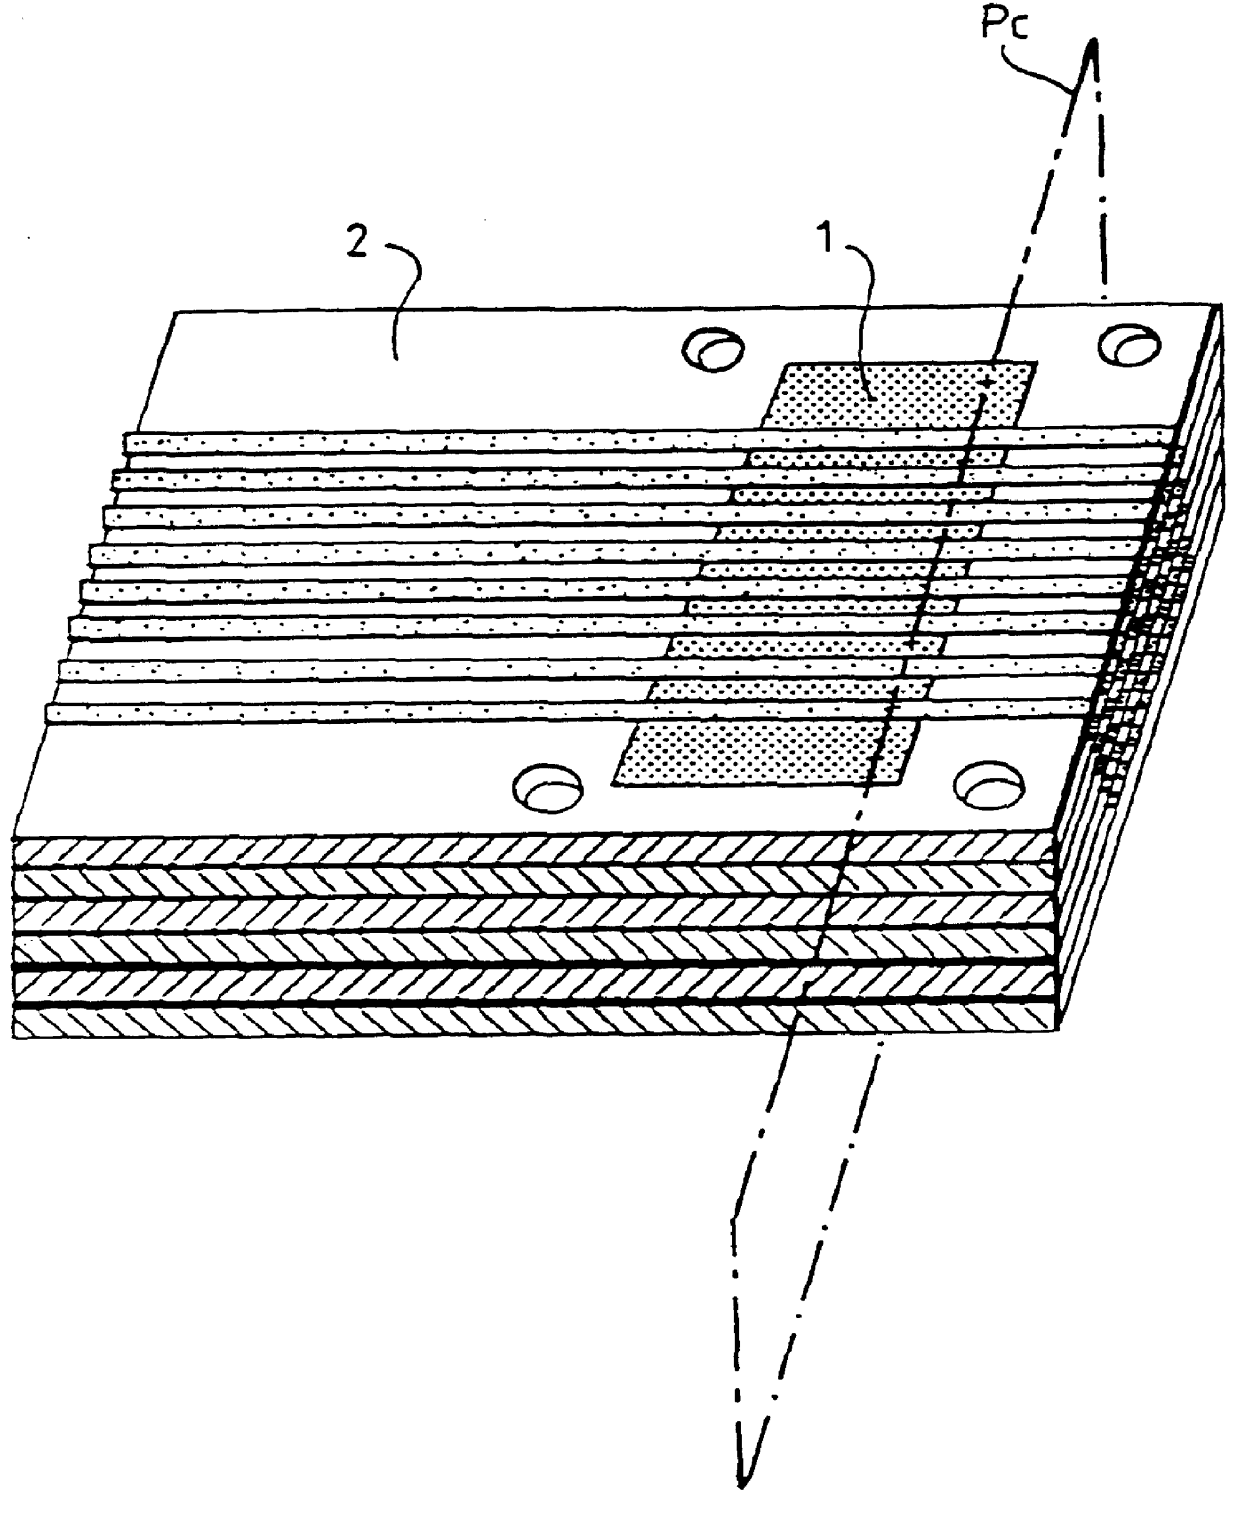 Method of making an acoustic probe